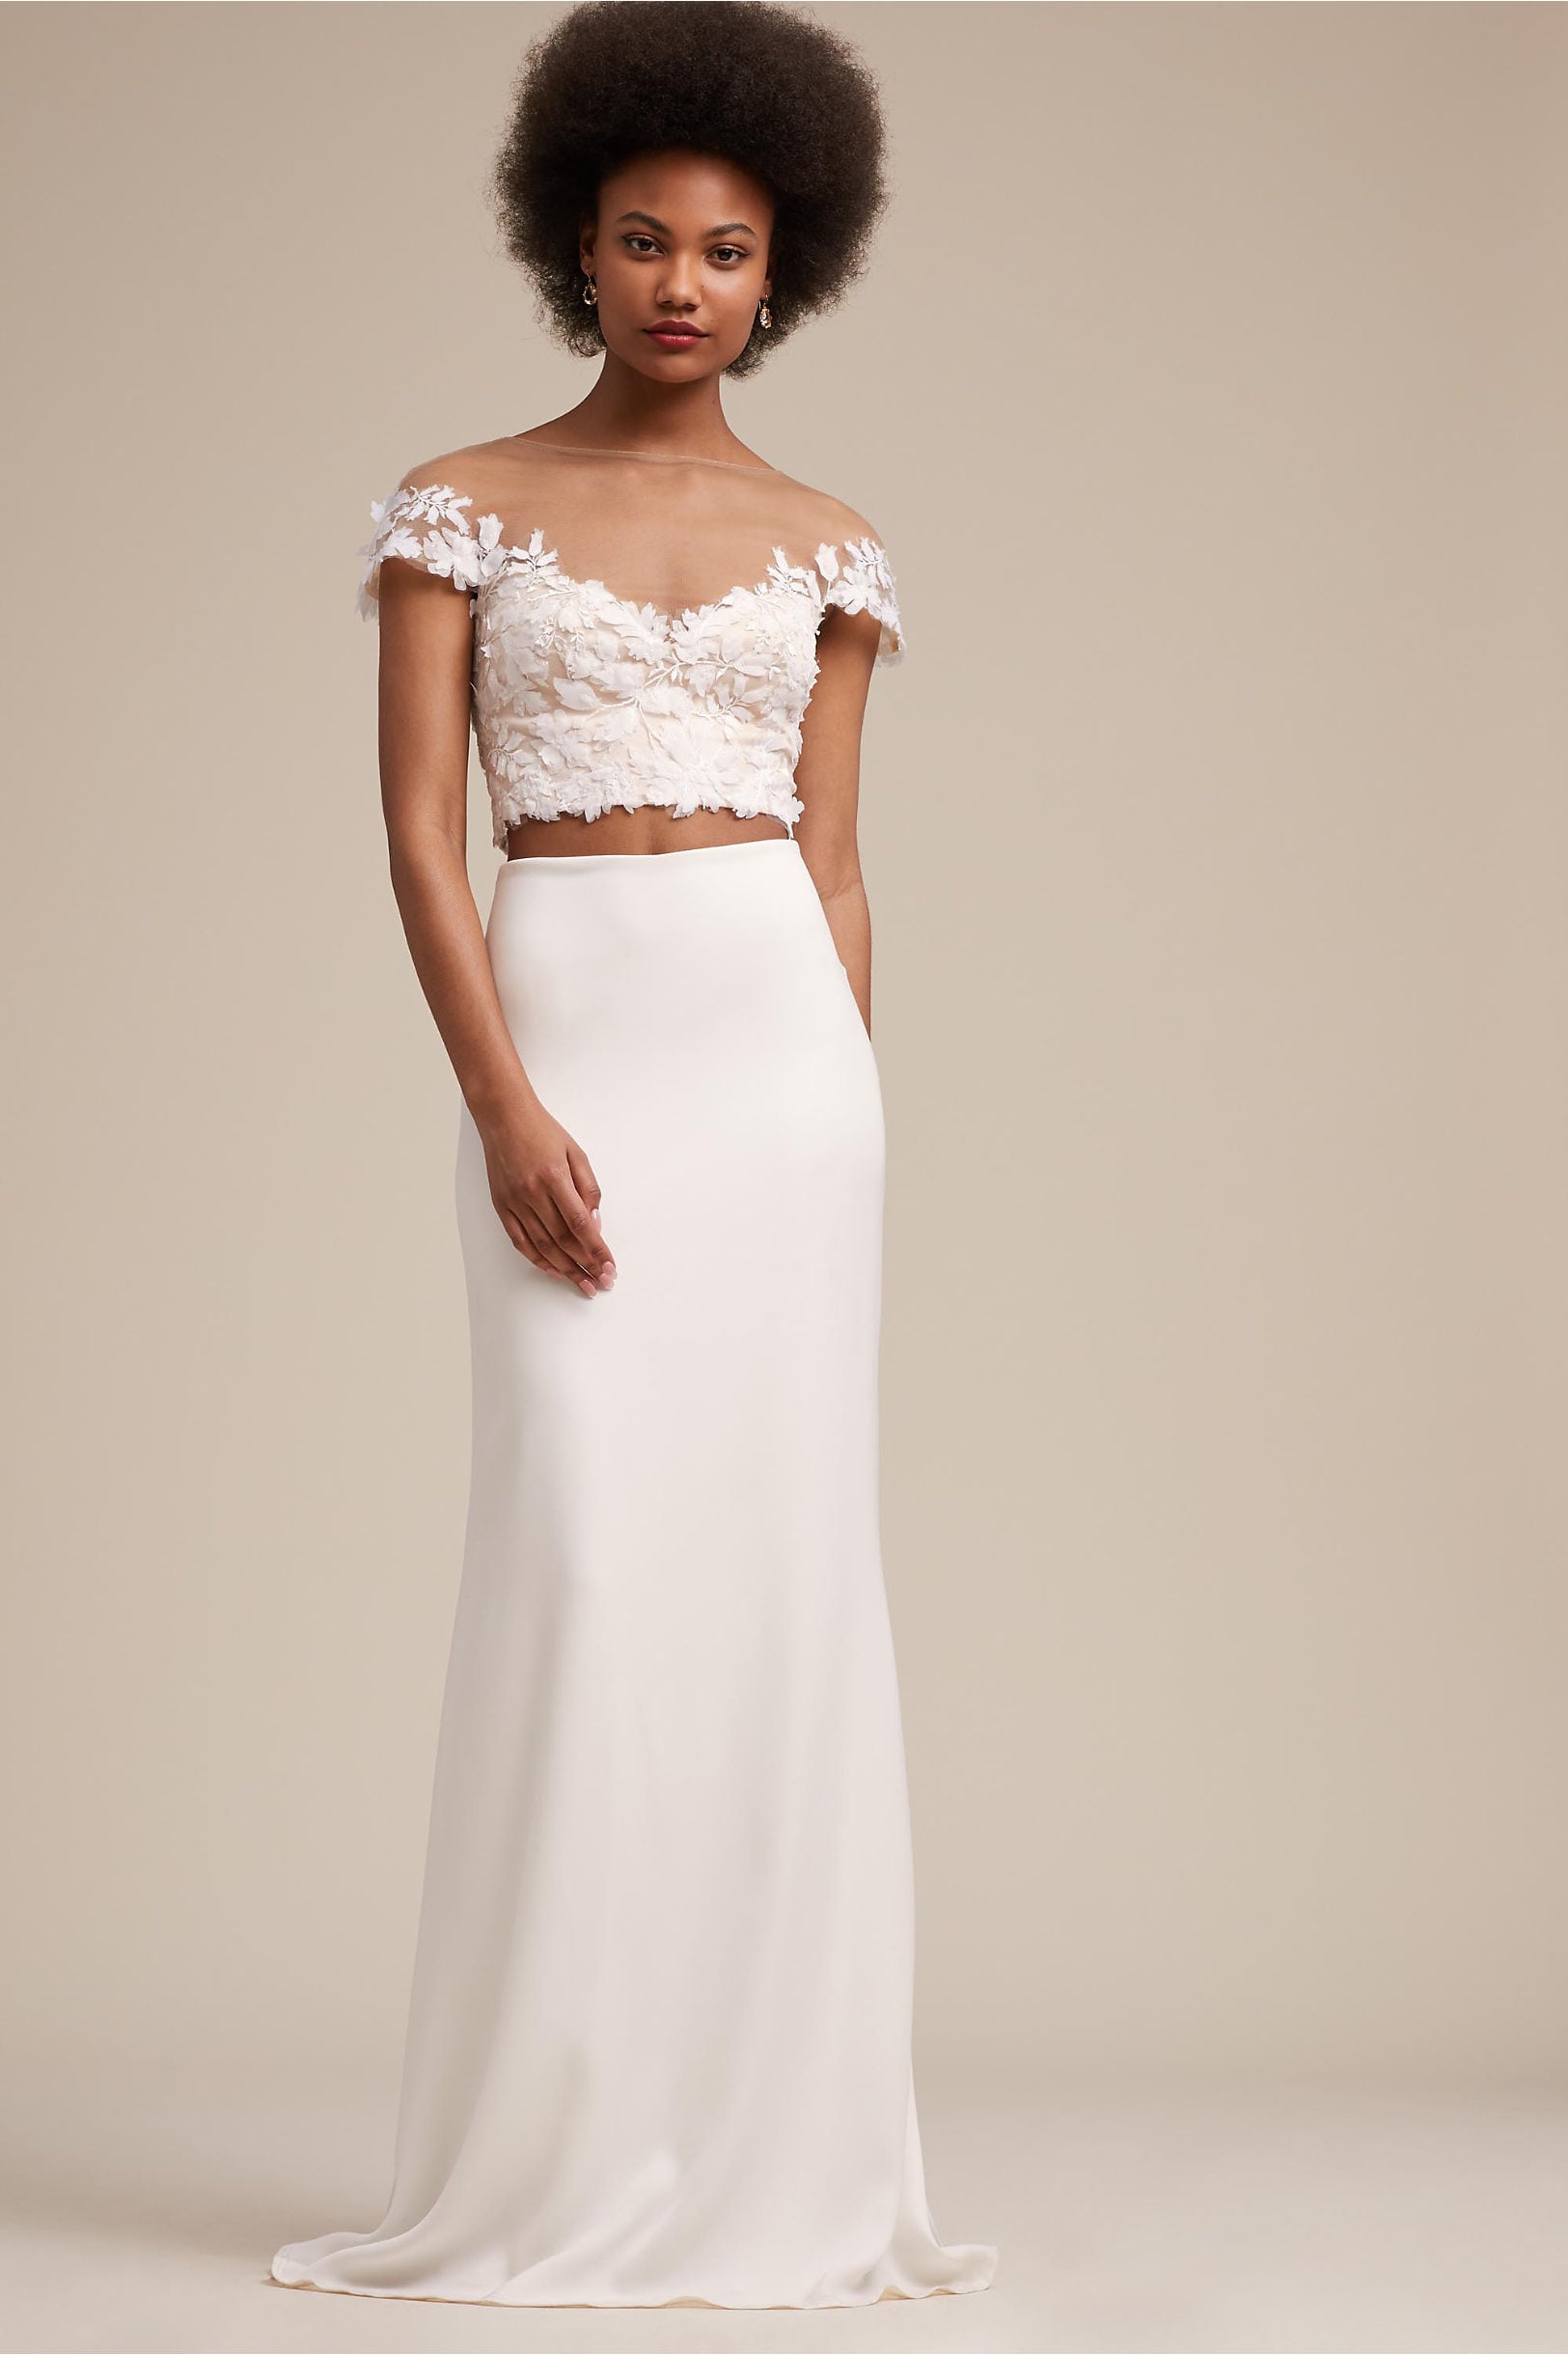 Leroy Top and Gidley Skirt from BHLDN: crop appliqué top with off the shoulder with v-neck, with high waist flowing column skirt